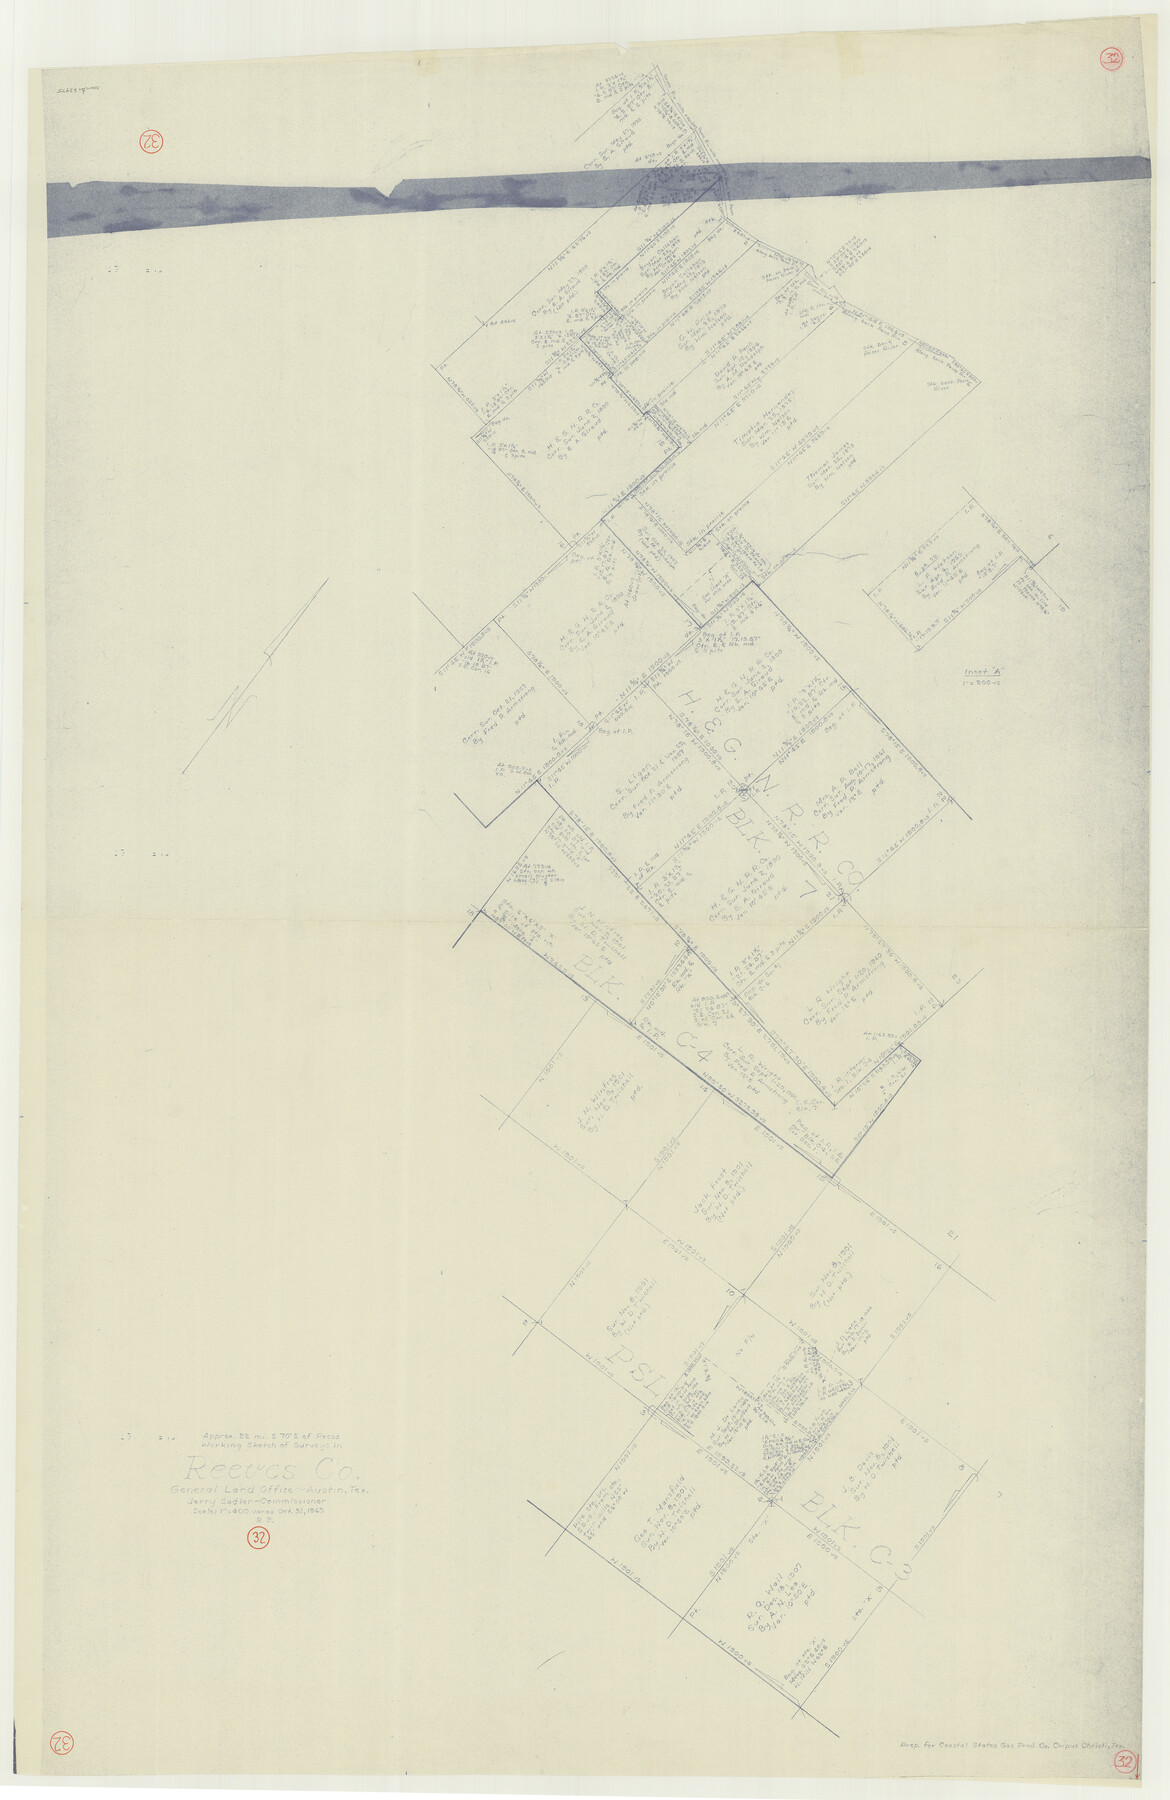 63475, Reeves County Working Sketch 32, General Map Collection